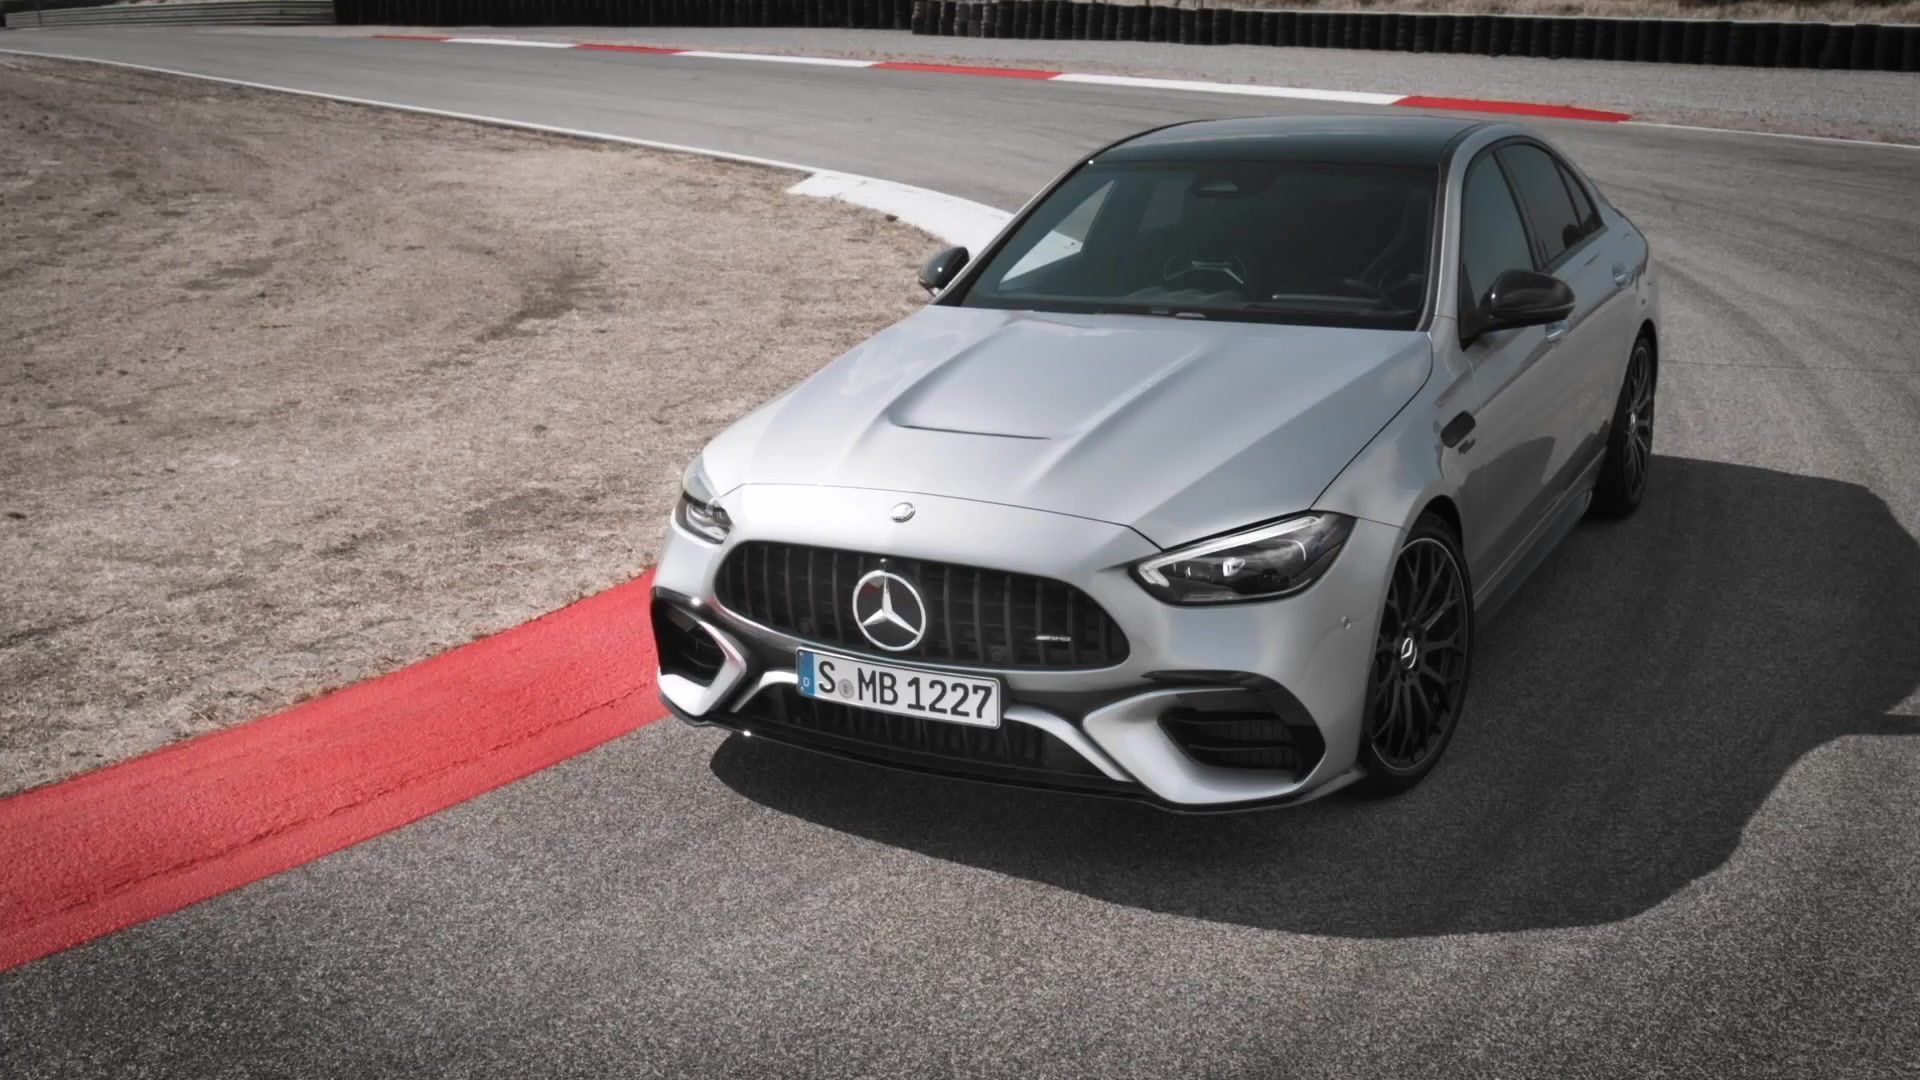 The new Mercedes-AMG C 63 S E PERFORMANCE - AMG 2.0-liter engine with electrically assisted exhaust gas turbocharger